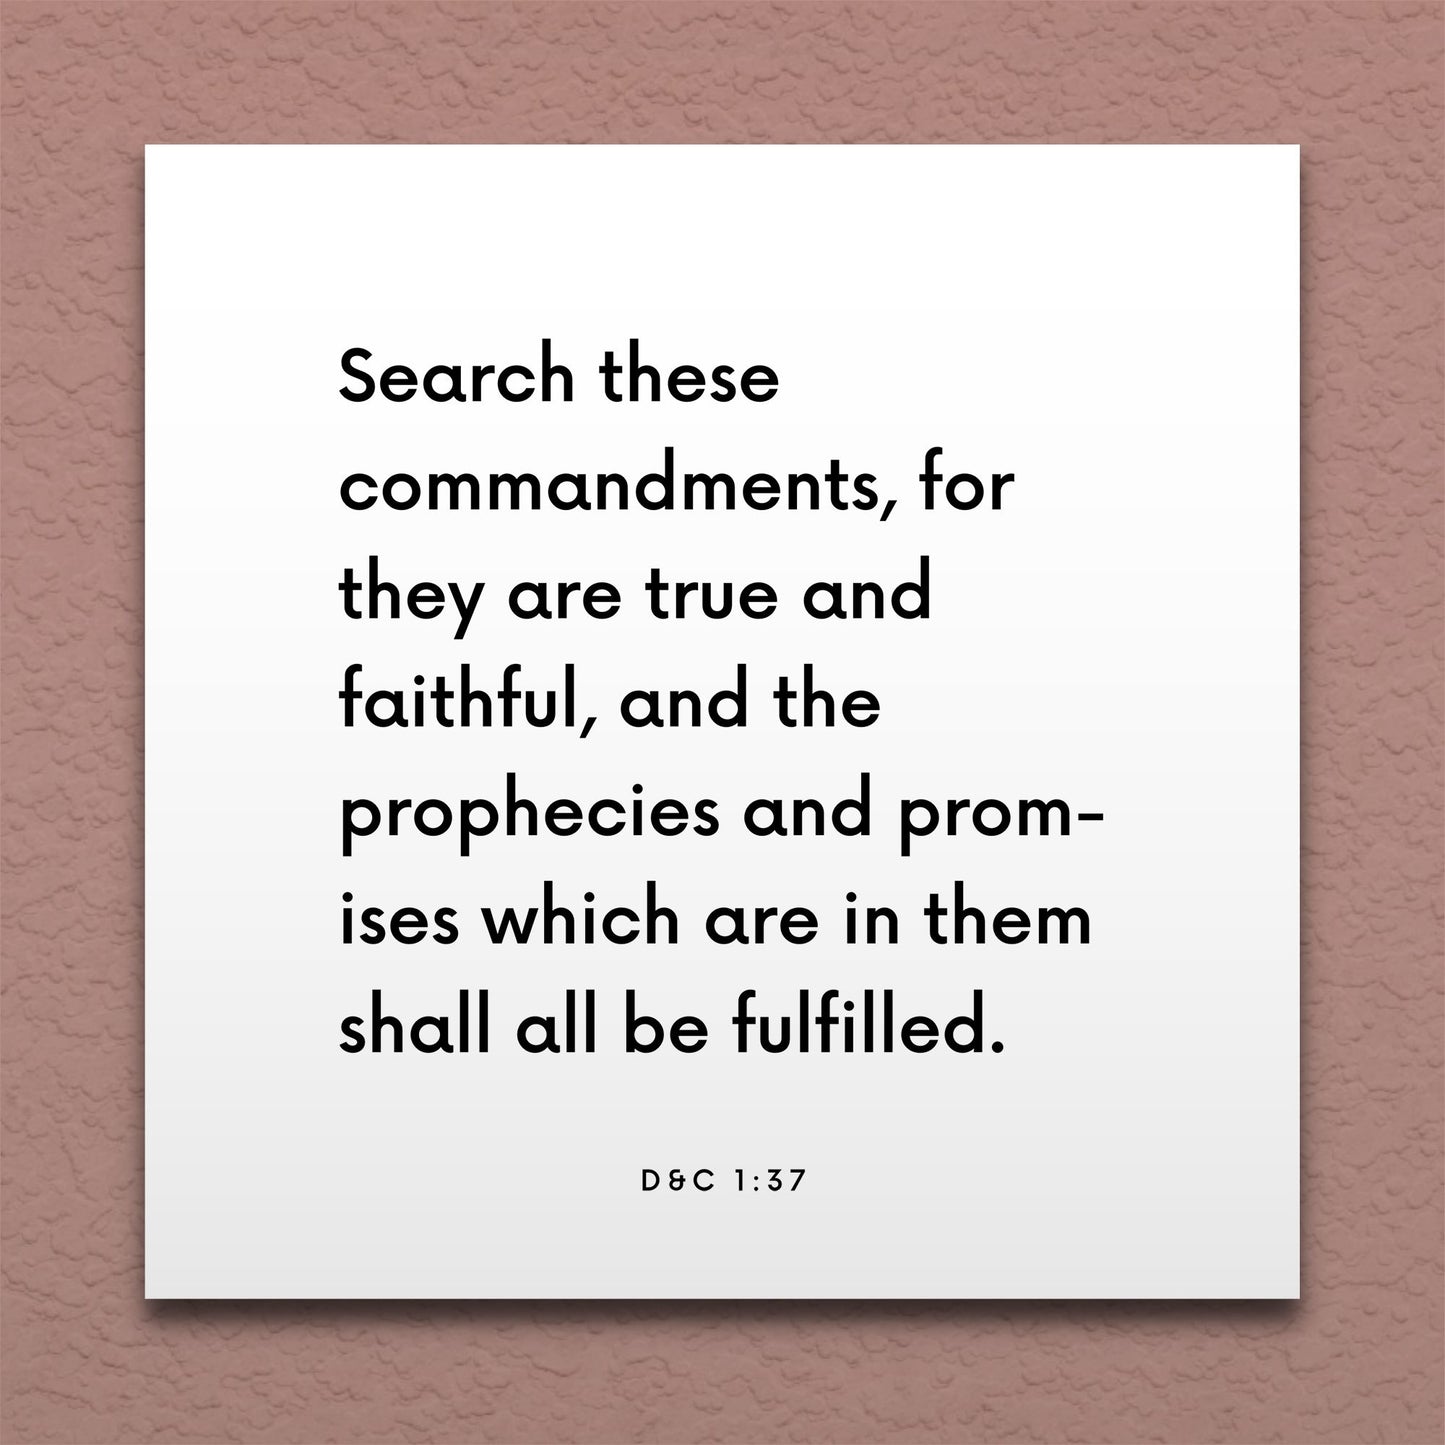 Wall-mounted scripture tile for D&C 1:37 - "Search these commandments, for they are true and faithful"